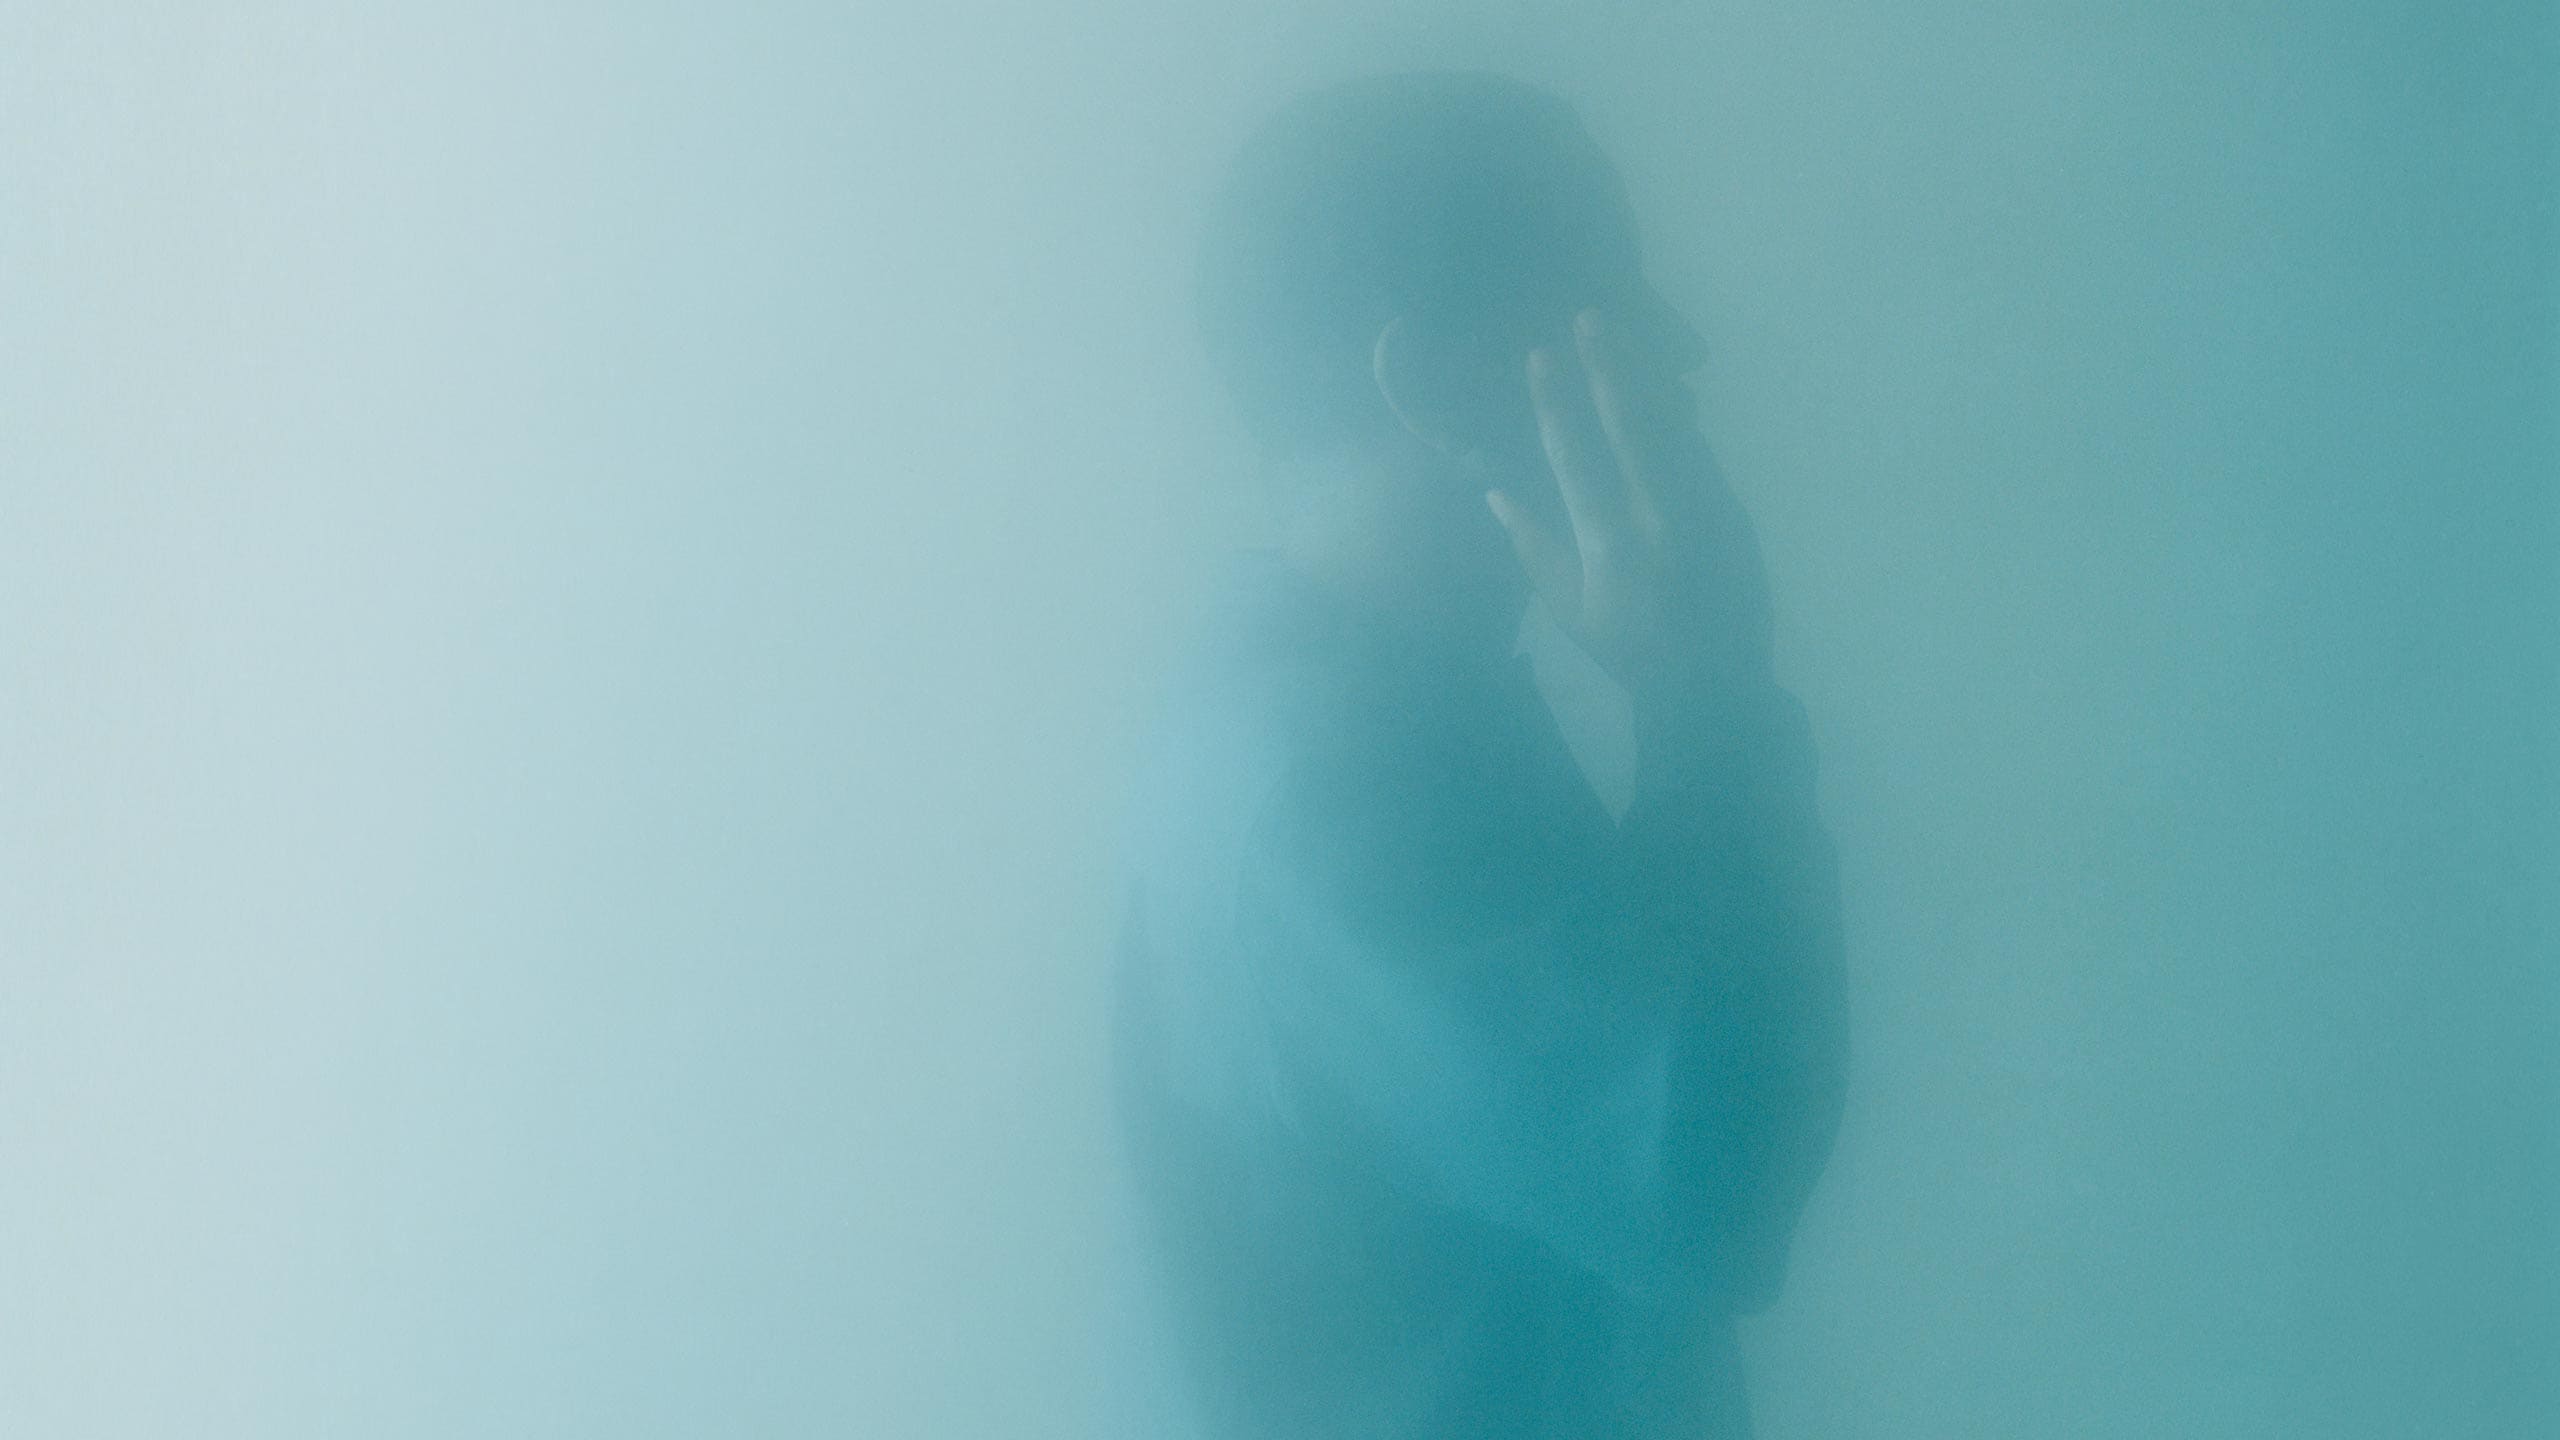 The profile of a figure applying serum to their face, obscured in a cyan haze.